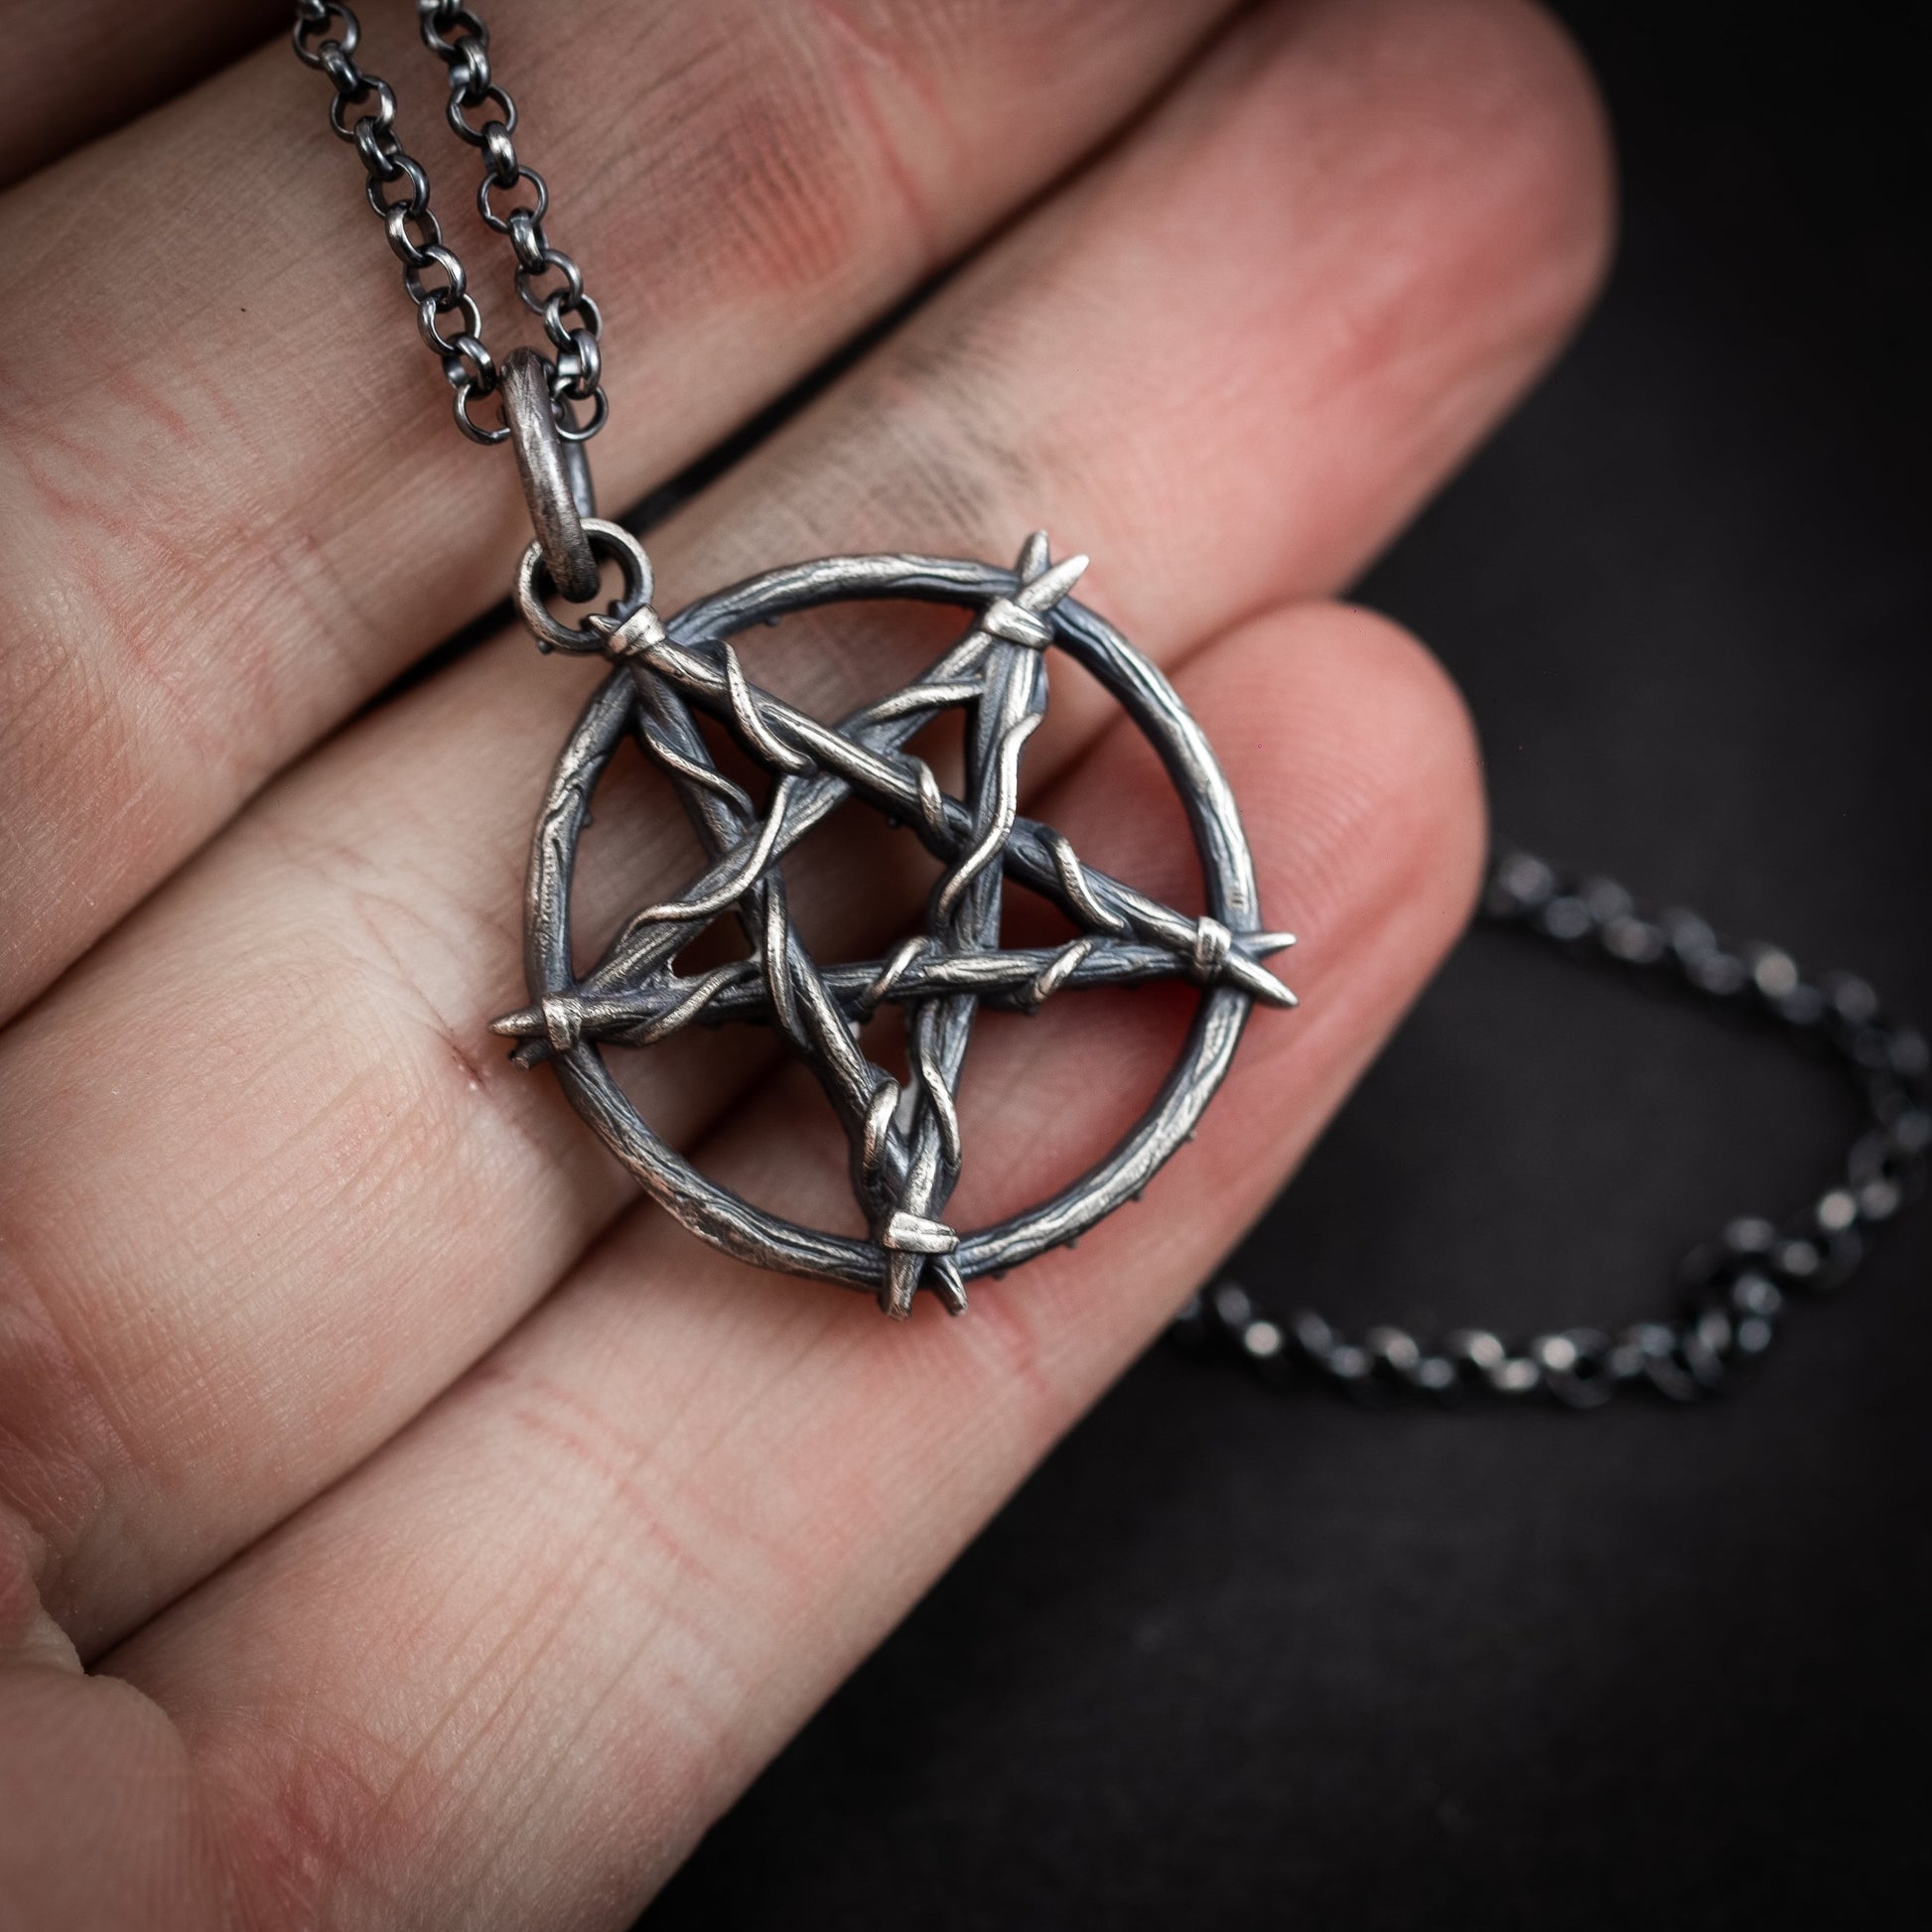 Silver Pentagram necklace pendant, pentacle necklace, Occult handmade jewelry , unique gift for men or women, wiccan necklace